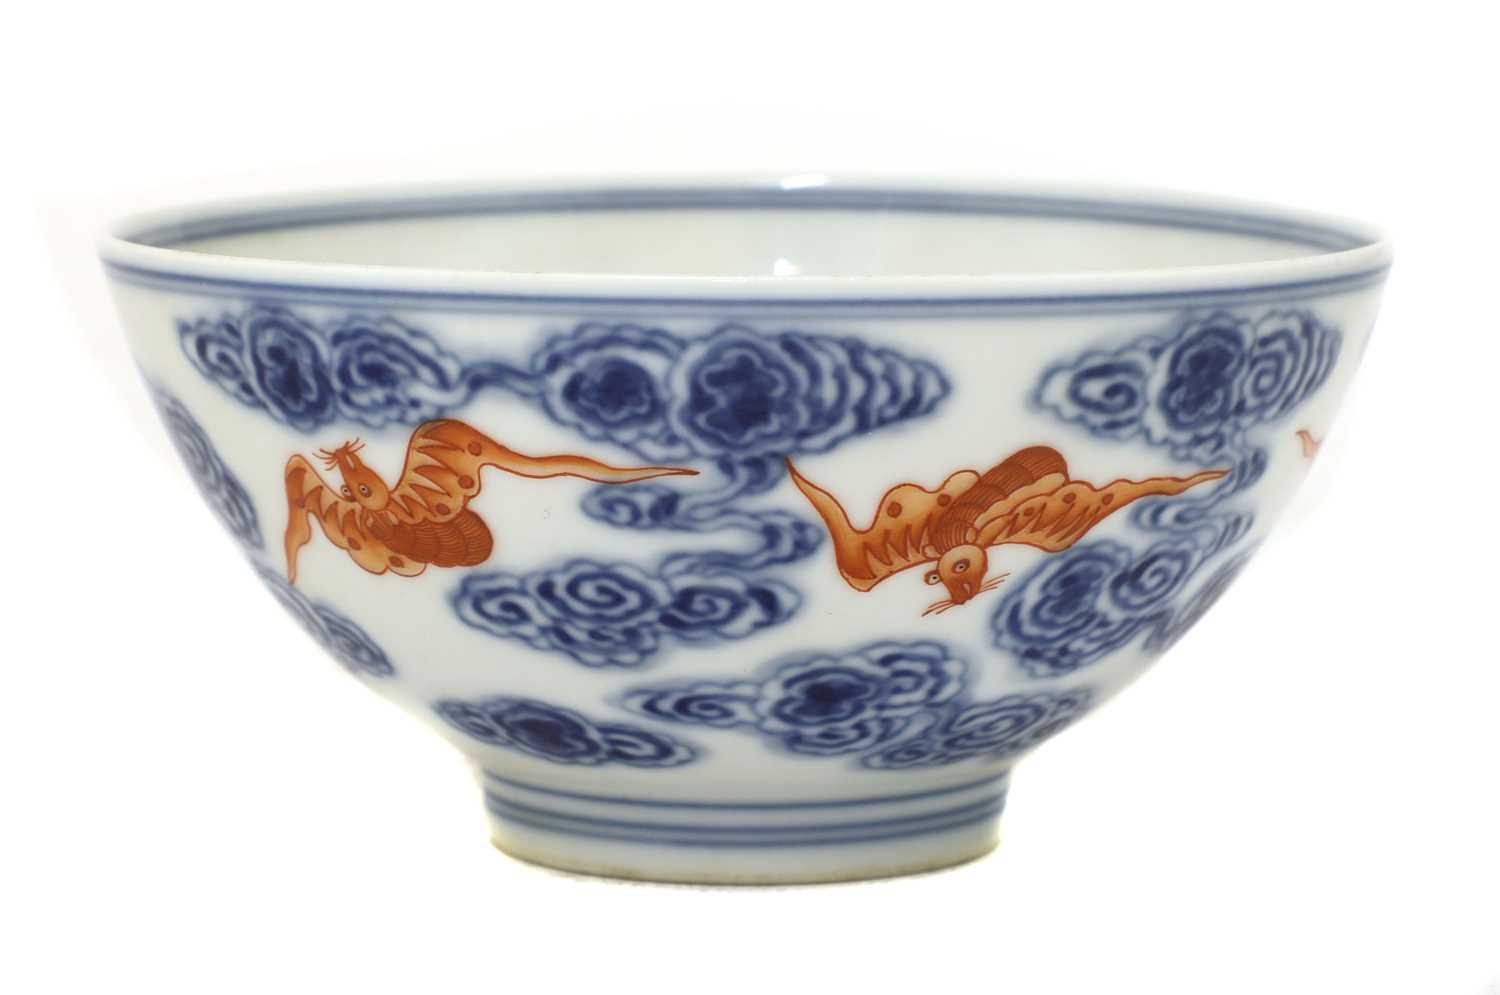 Lot 50 - A Chinese iron-red and blue bowl